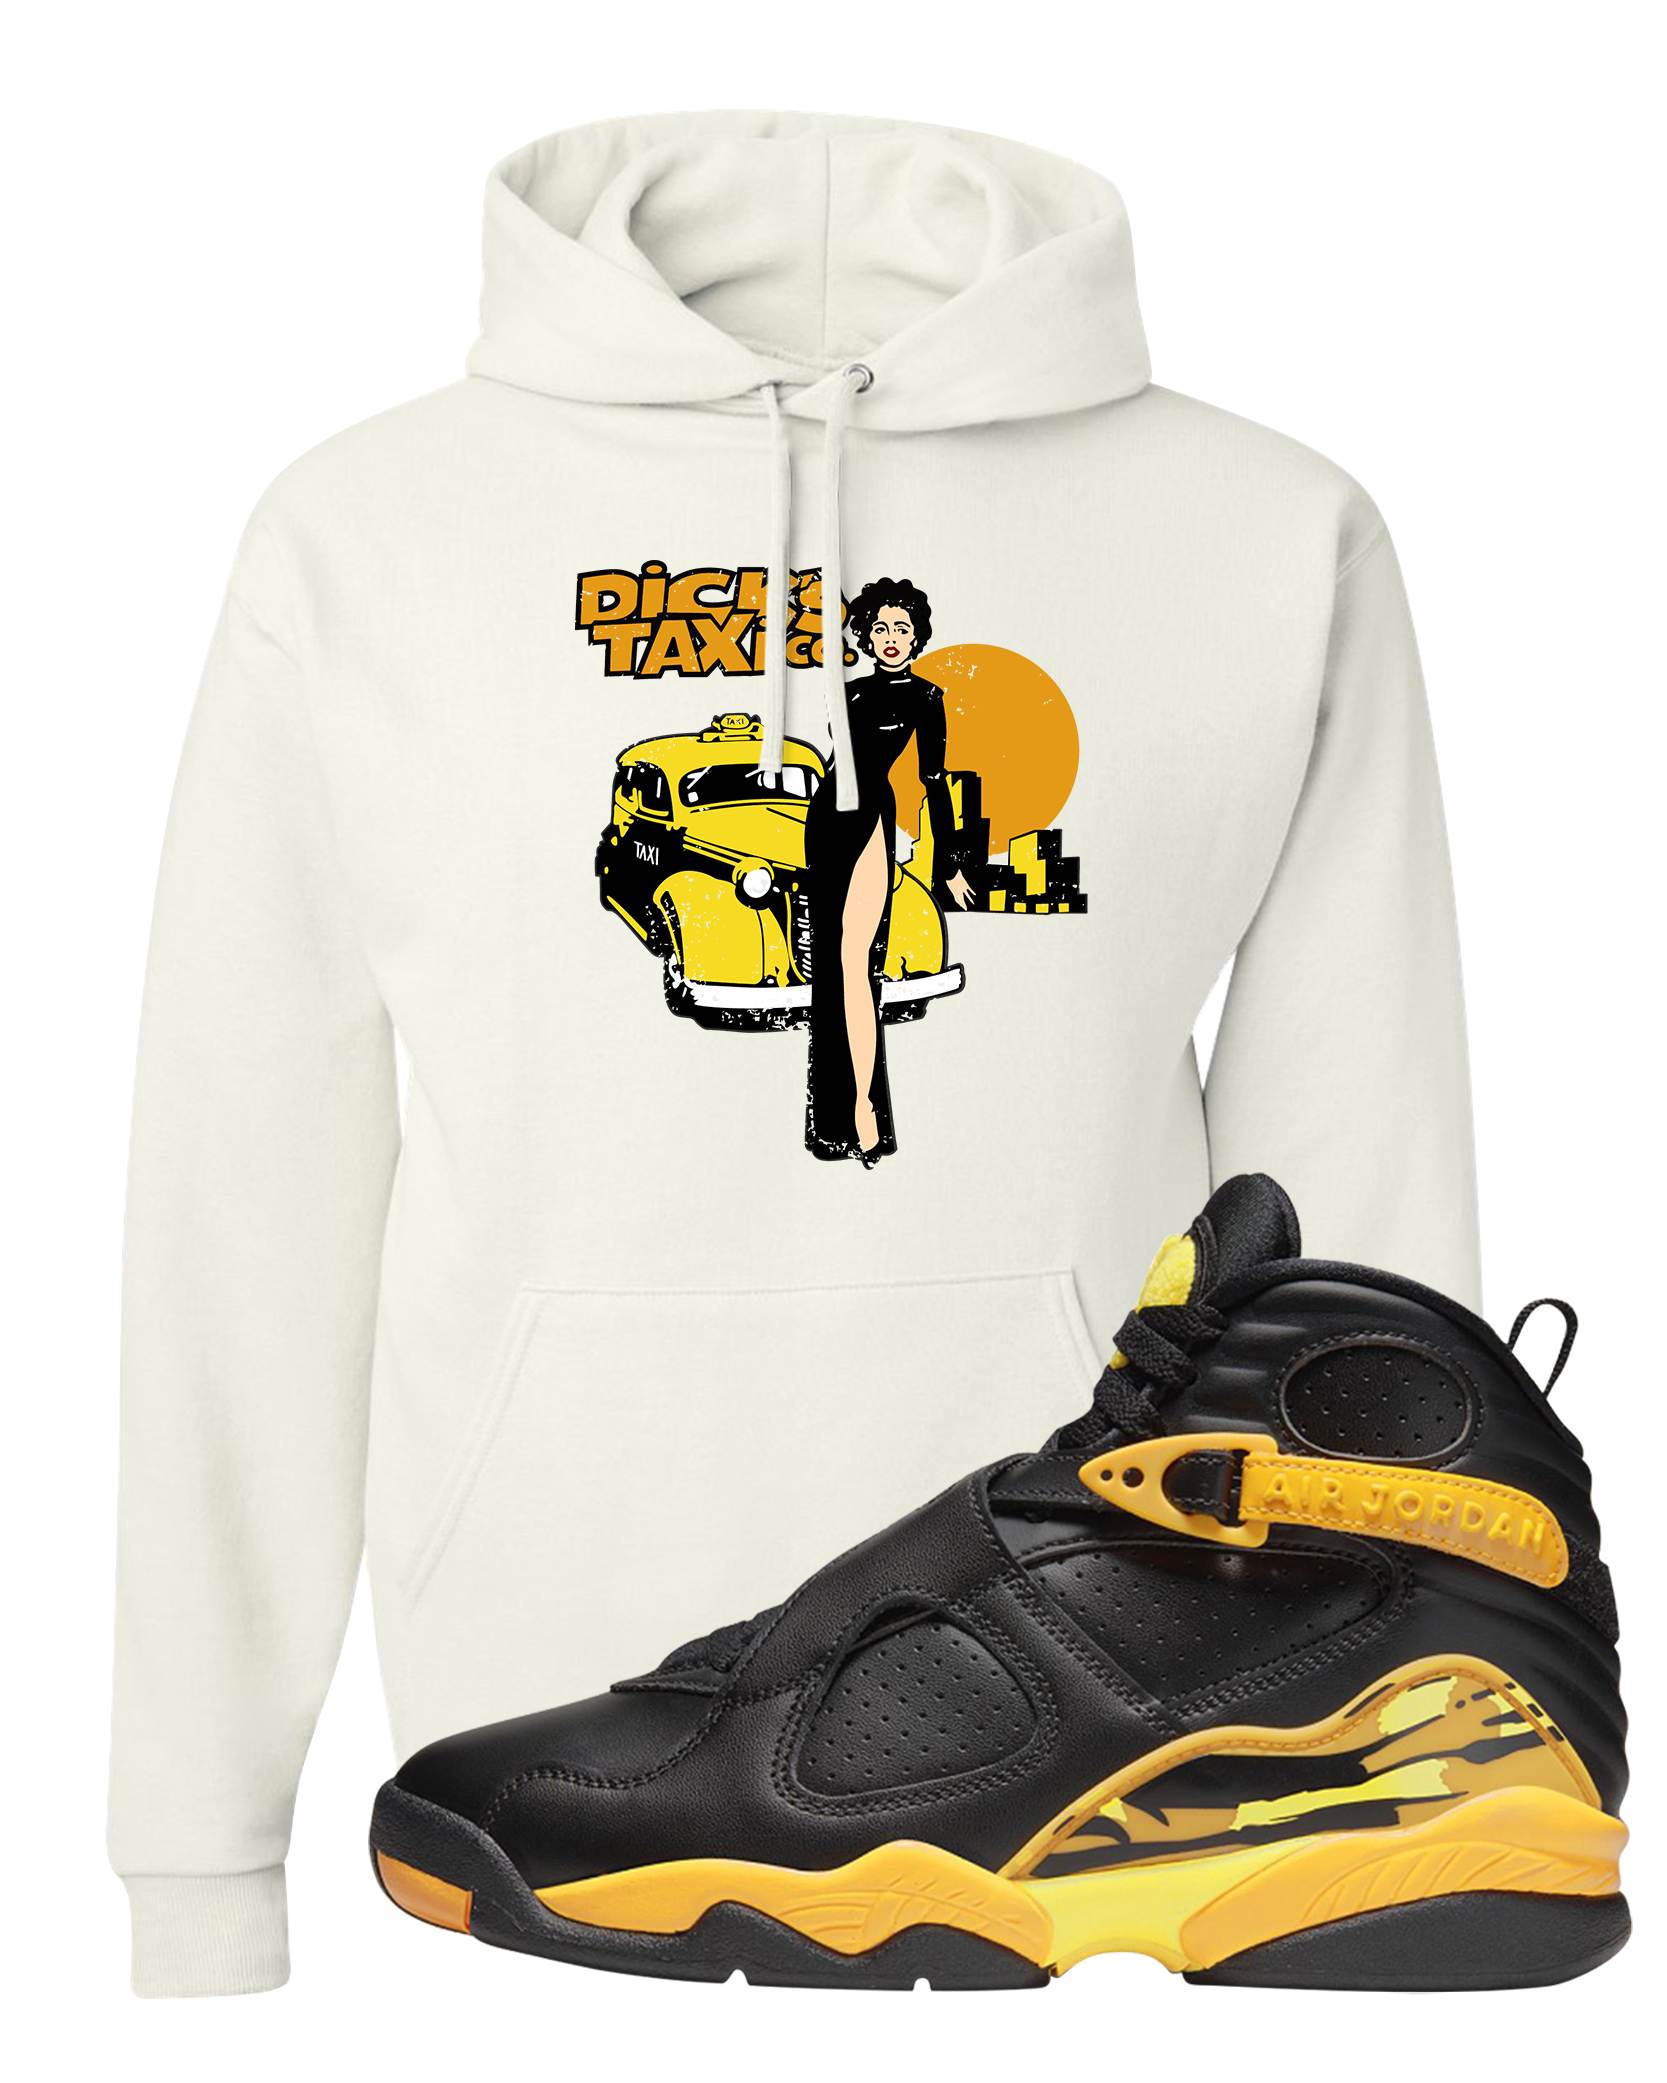 Taxi 8s Hoodie | Dick's Taxi Co., White